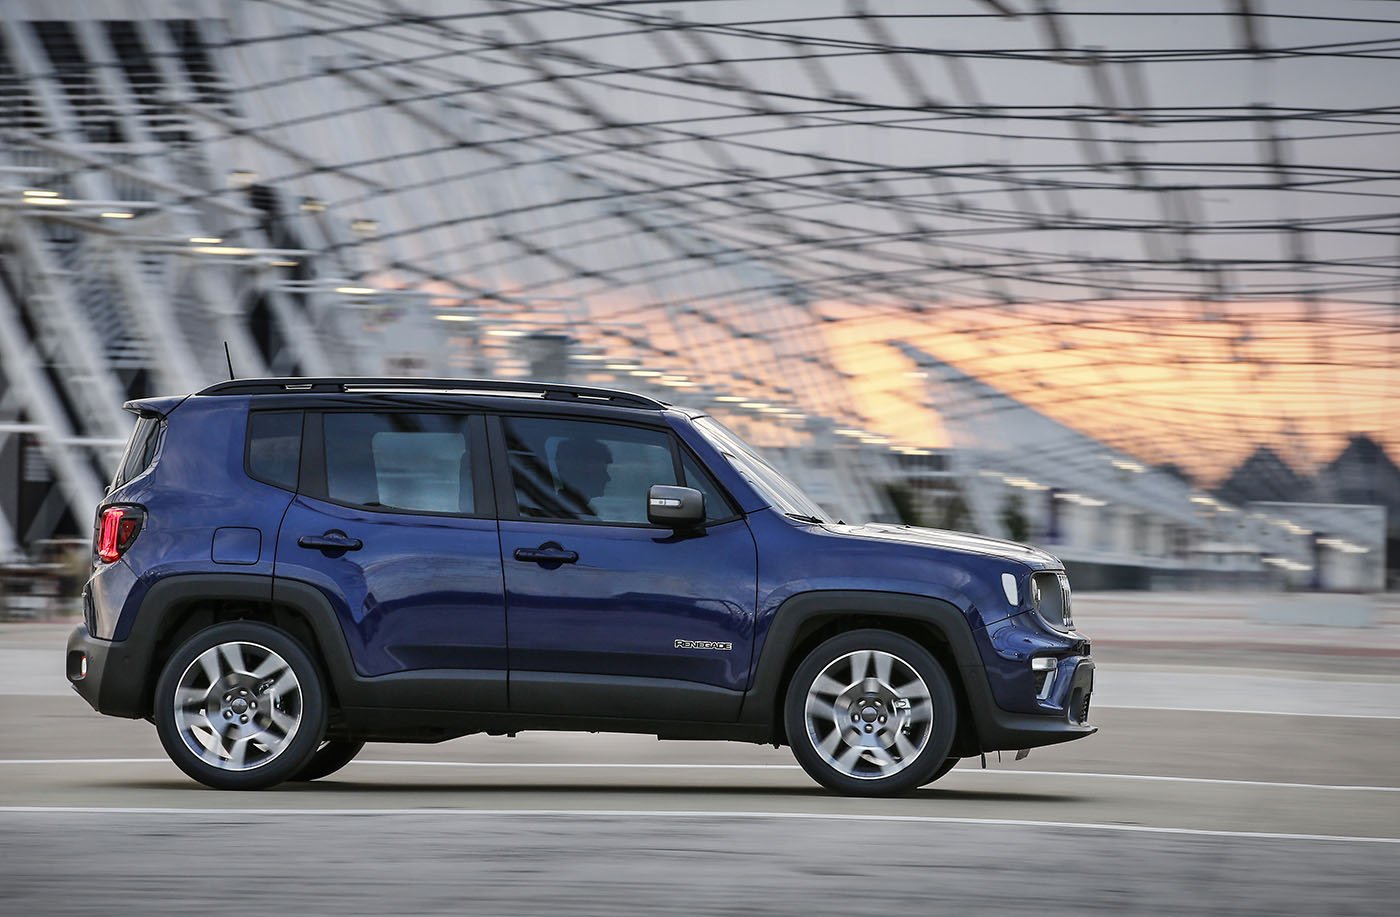 180620_jeep_new-renegade-my19-limited_08_copy.jpg